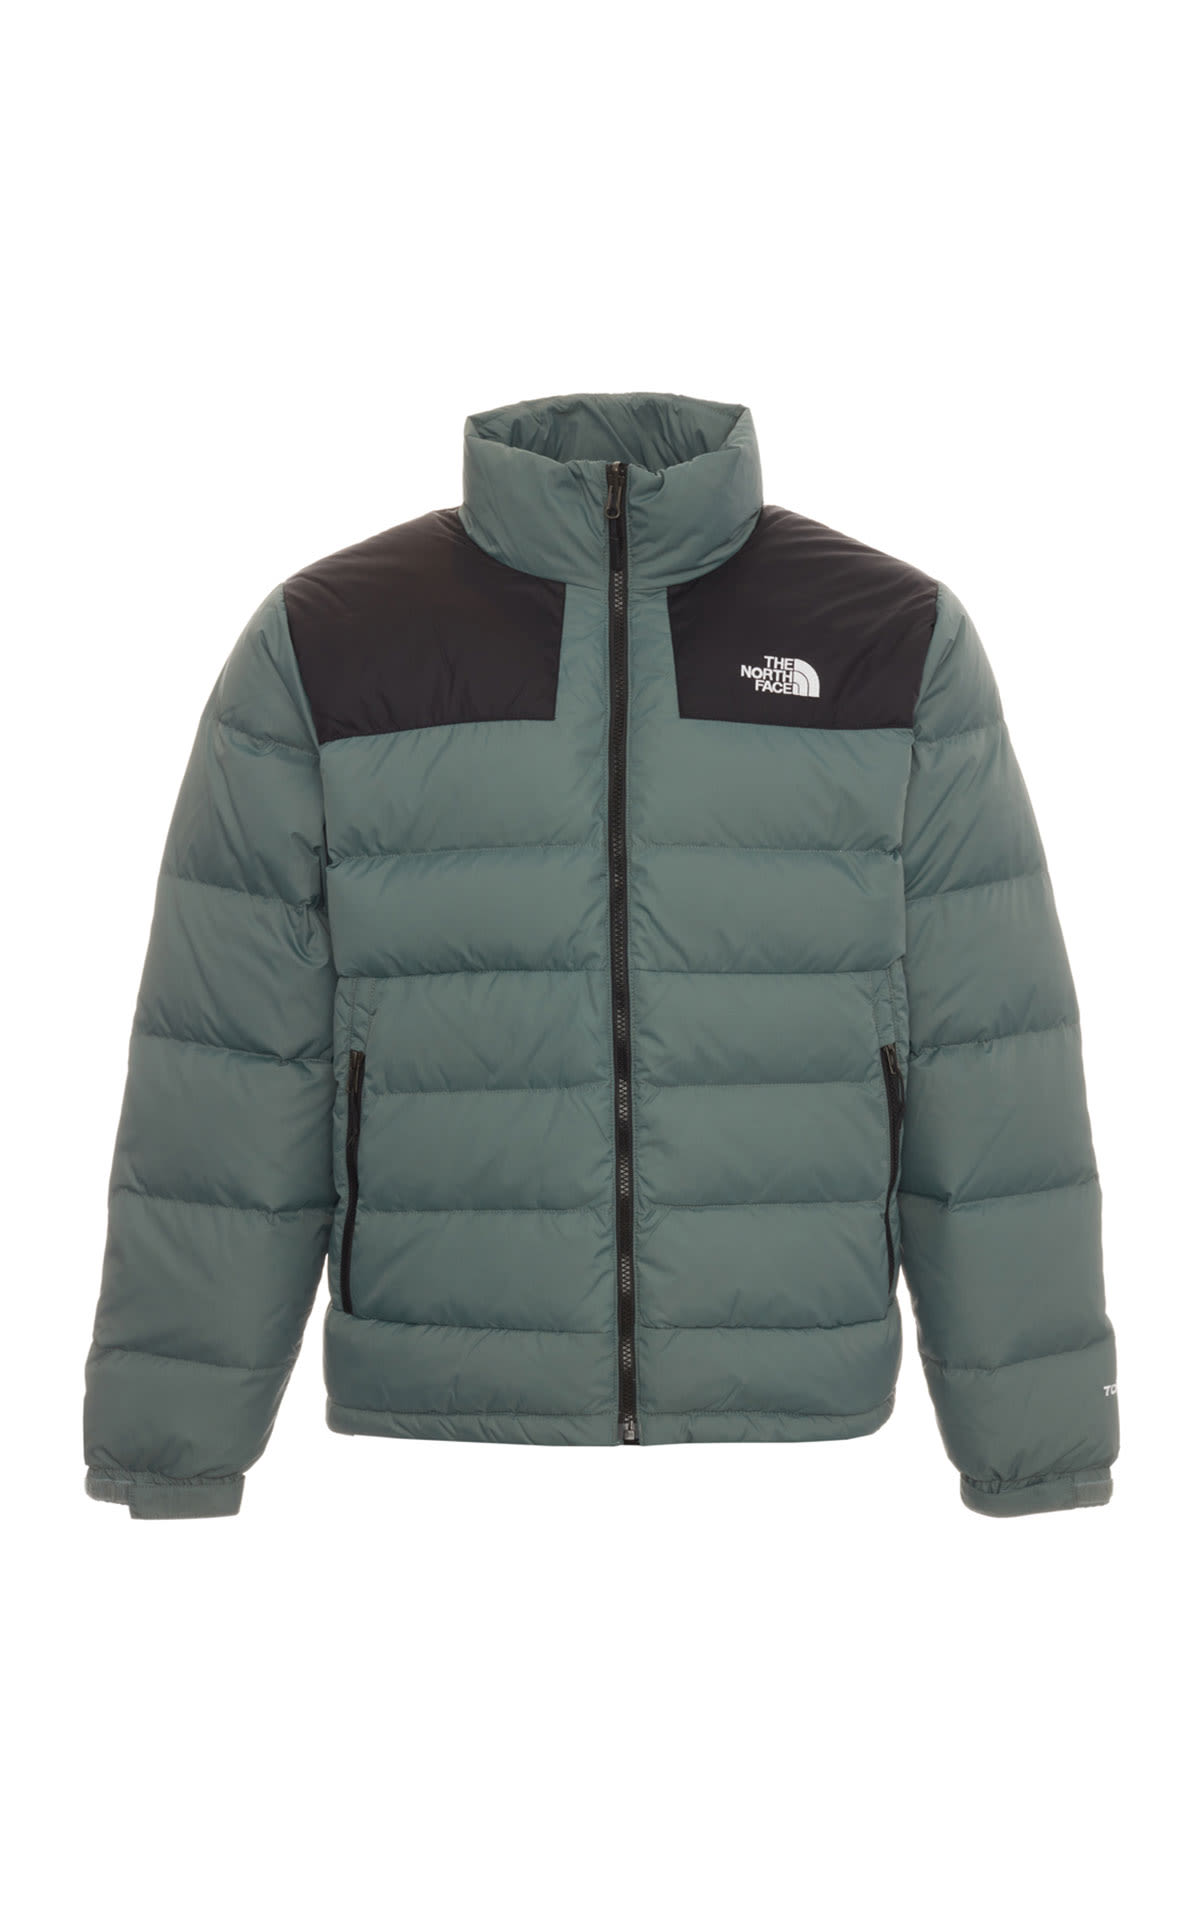 The North Face Massif Jacket from Bicester Village